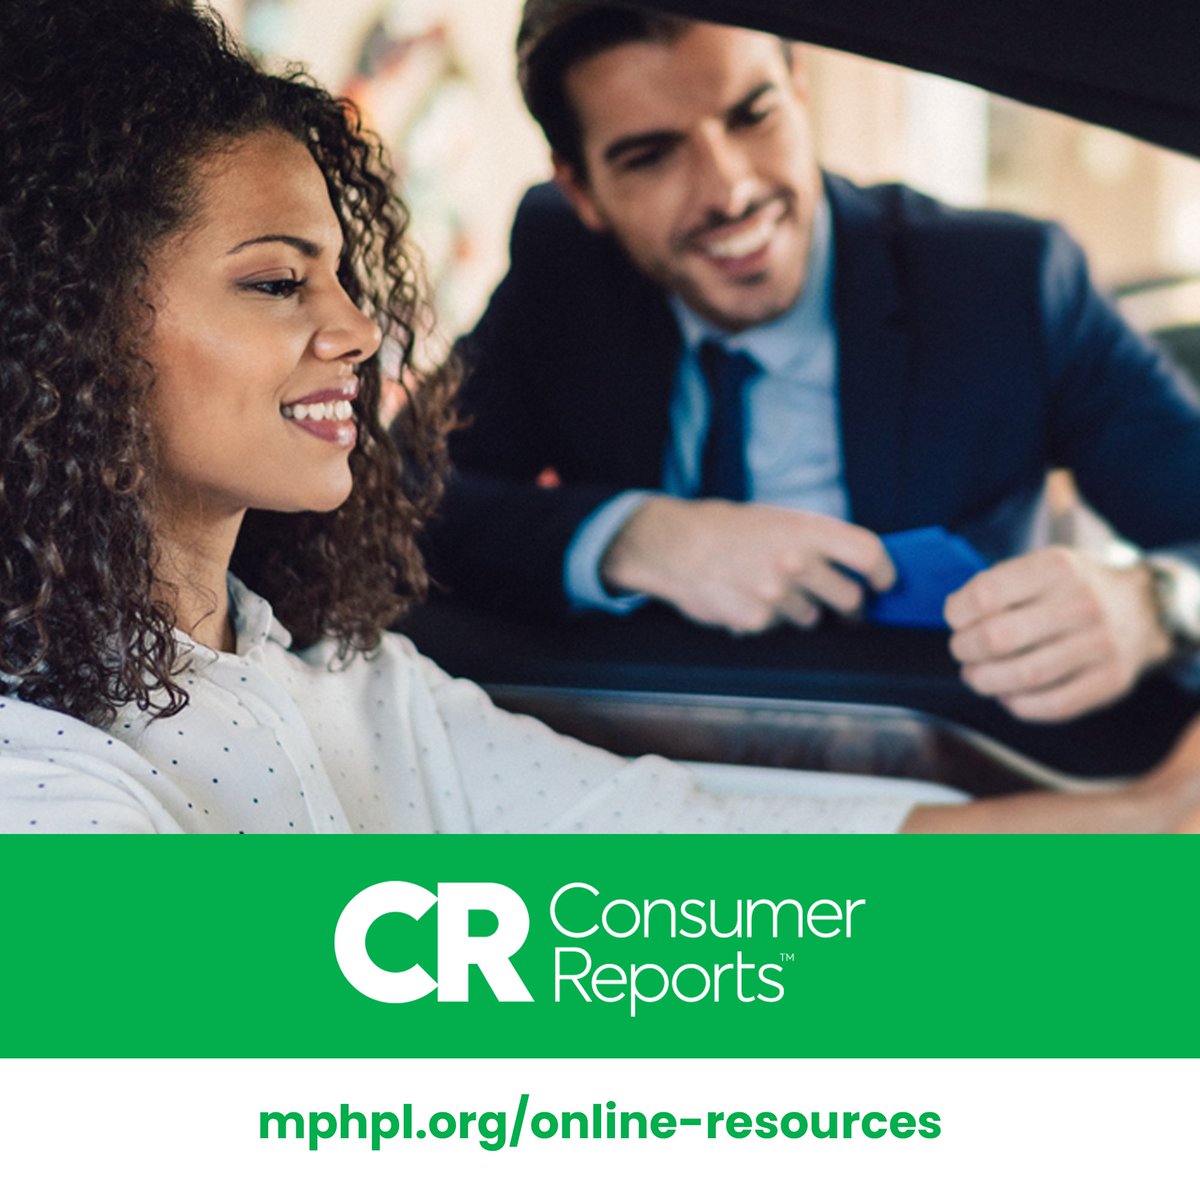 Each spring, #ConsumerReports unveils their top 10 vehicle picks based on road tests, predicted reliability, owner satisfaction & safety. Read the entire 2024 report FREE - all you need is your #MPHPL card and the @ConsumerReports database. 👇🔗 mphpl.org/consumer-repor…